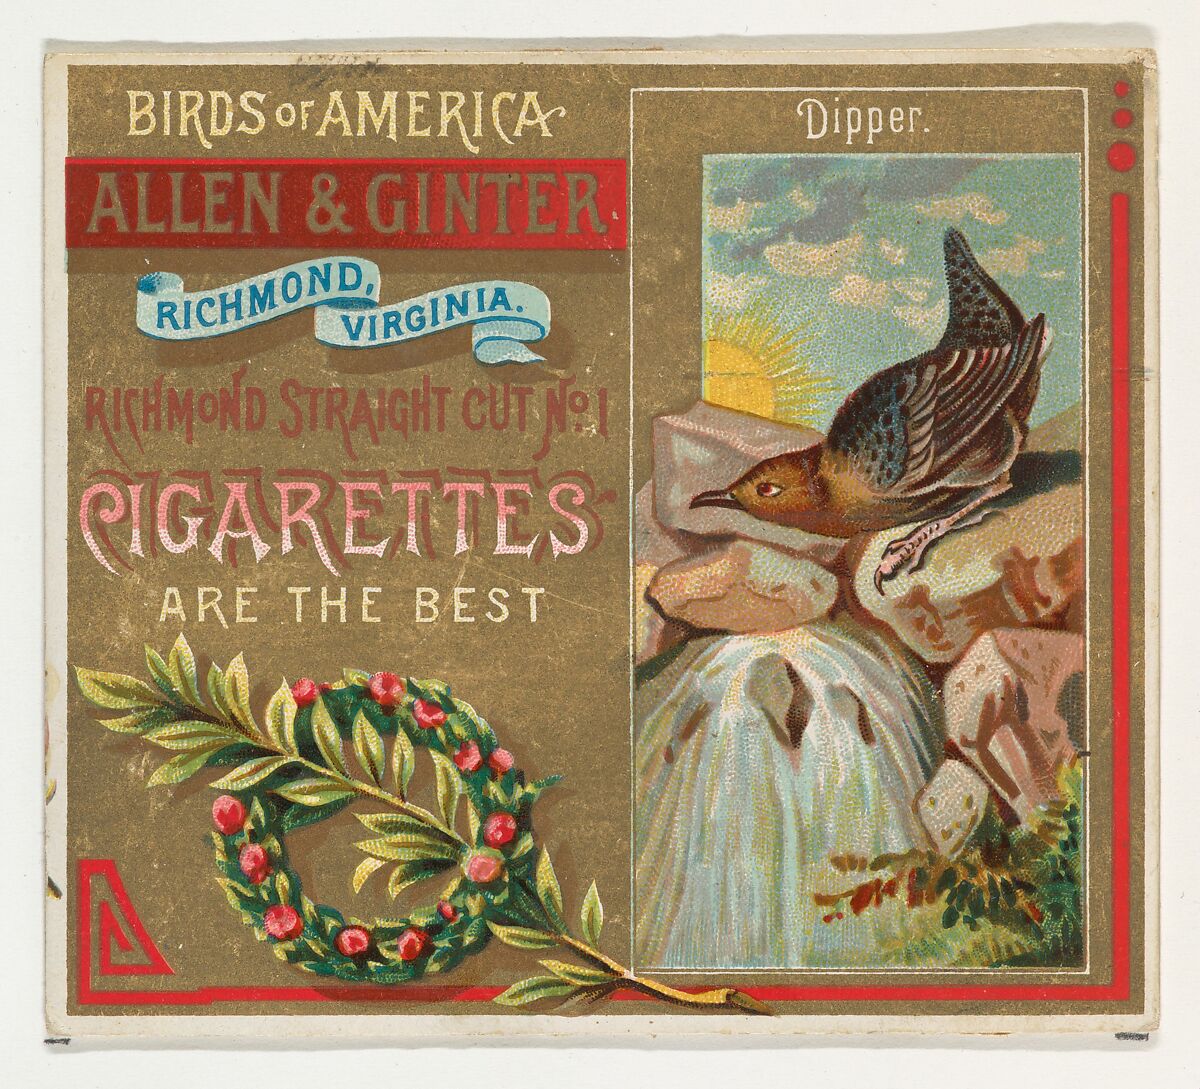 Dipper, from the Birds of America series (N37) for Allen & Ginter Cigarettes, Issued by Allen &amp; Ginter (American, Richmond, Virginia), Commercial color lithograph 